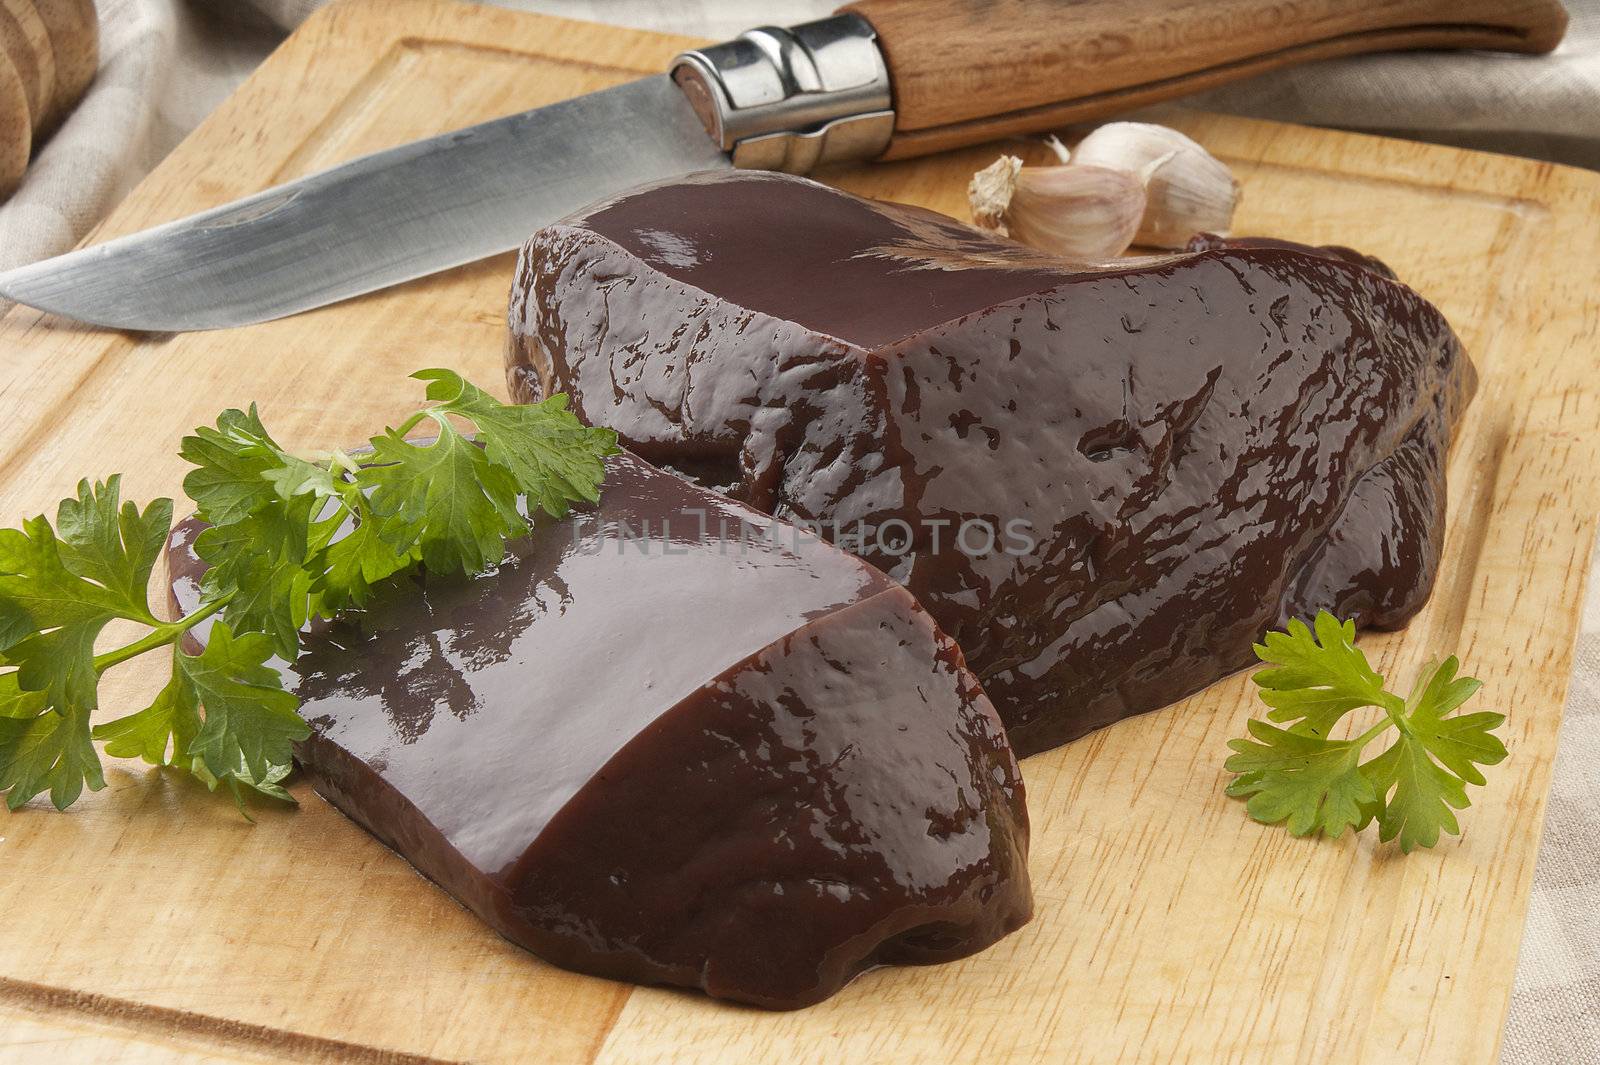 Two pieces of raw liver with parsley; garlic and knife on the wooden board